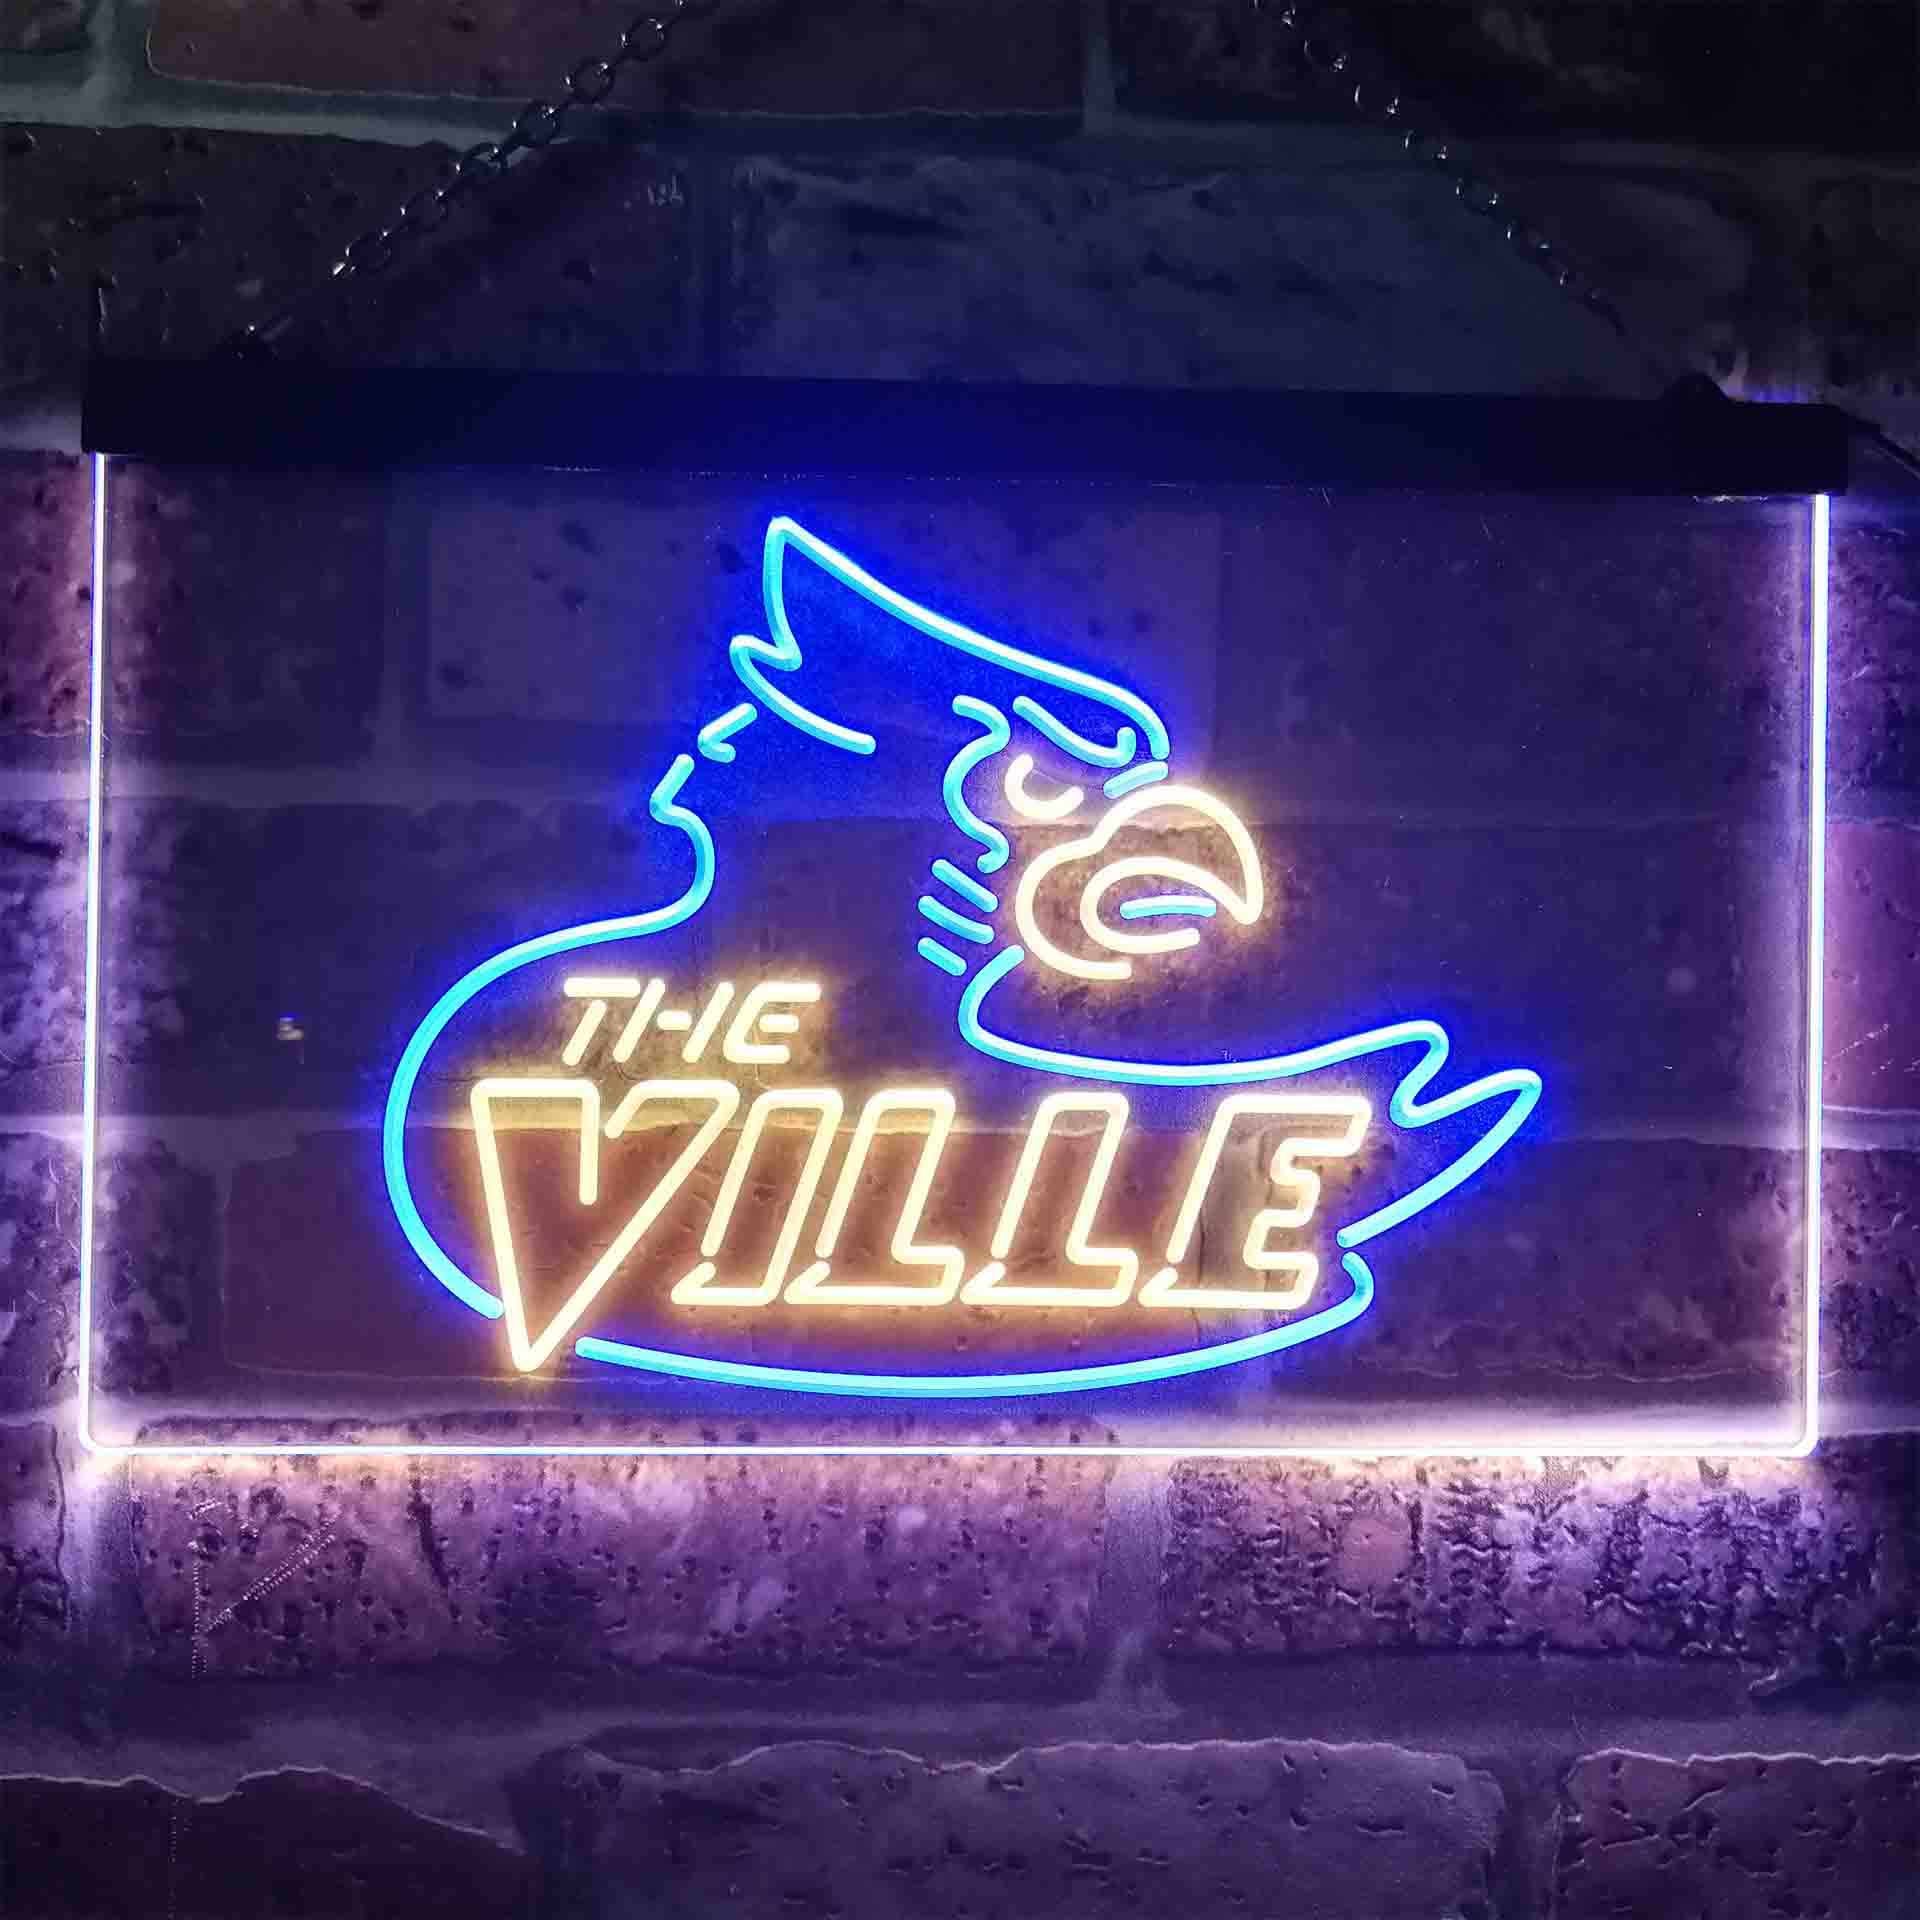 Led Signs, Louisville Neon Sign